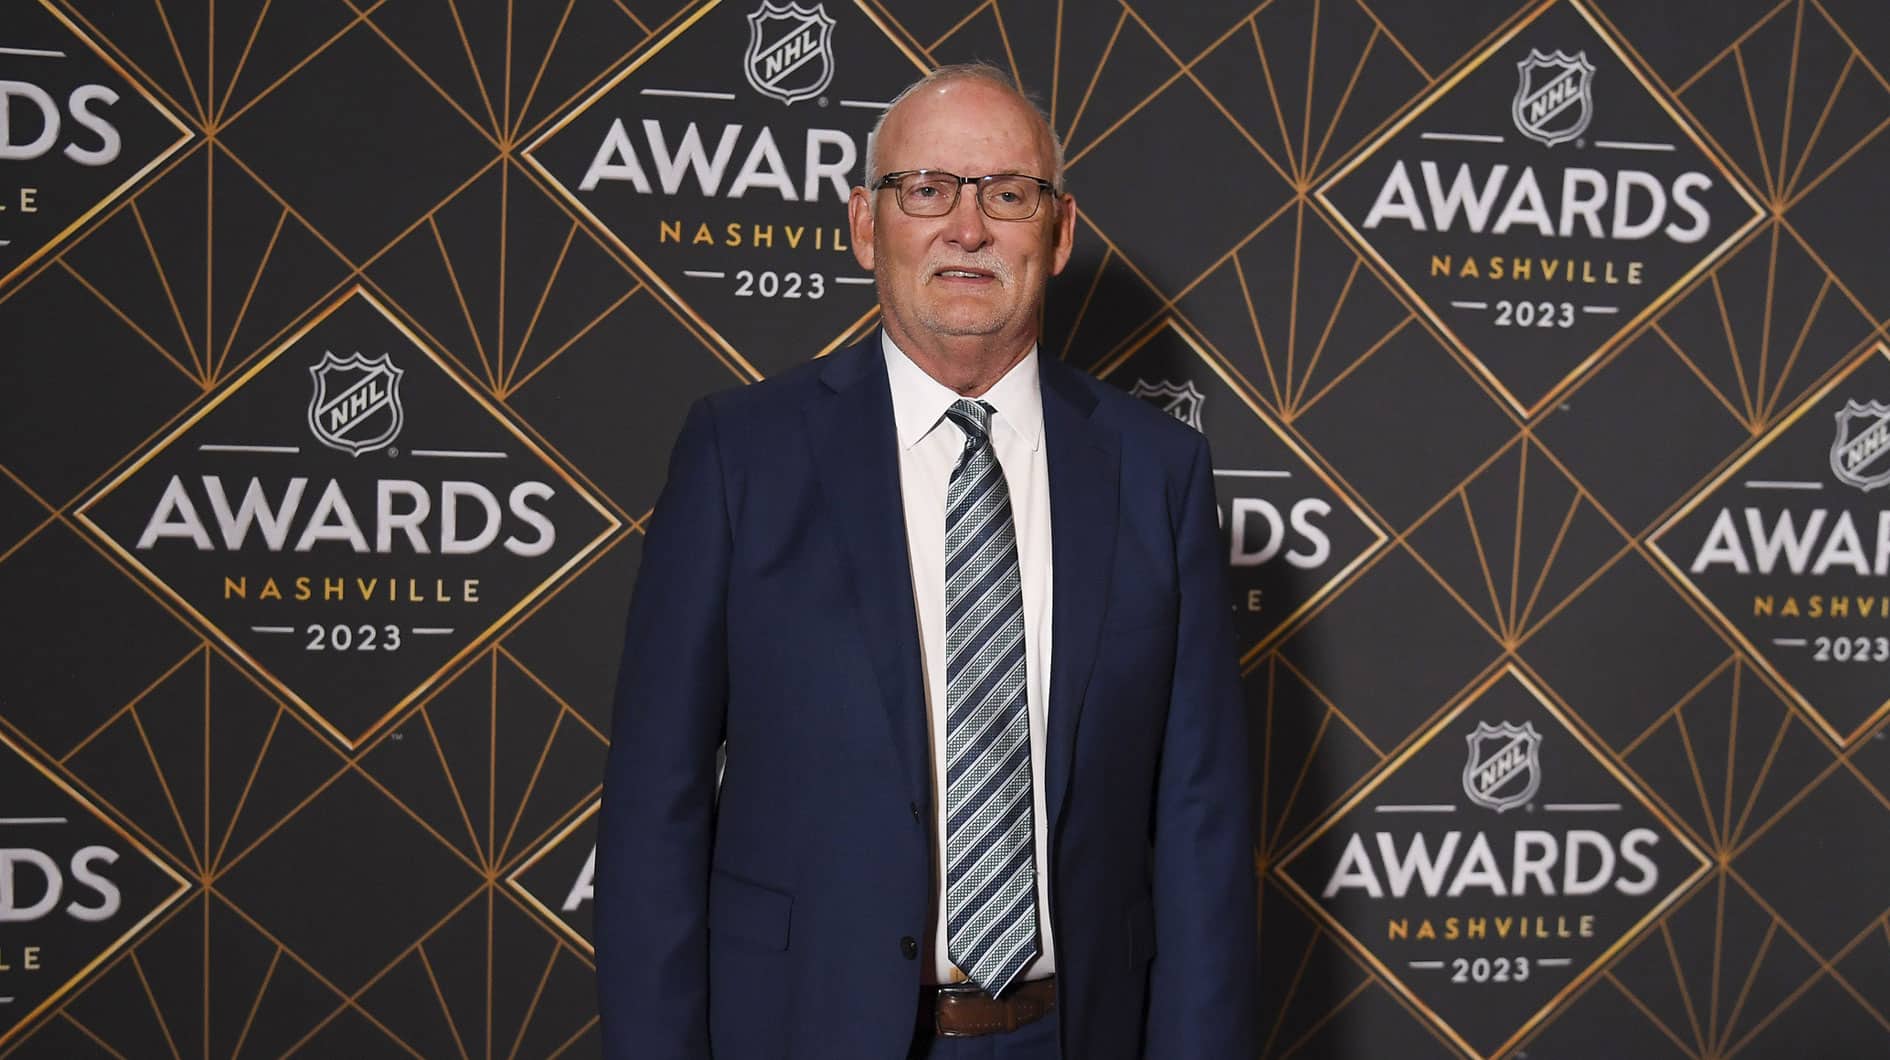 New Jersey Devils head coach Lindy Ruff arrives on the red carpet before the 2023 NHL Awards at Bridgestone Arena.